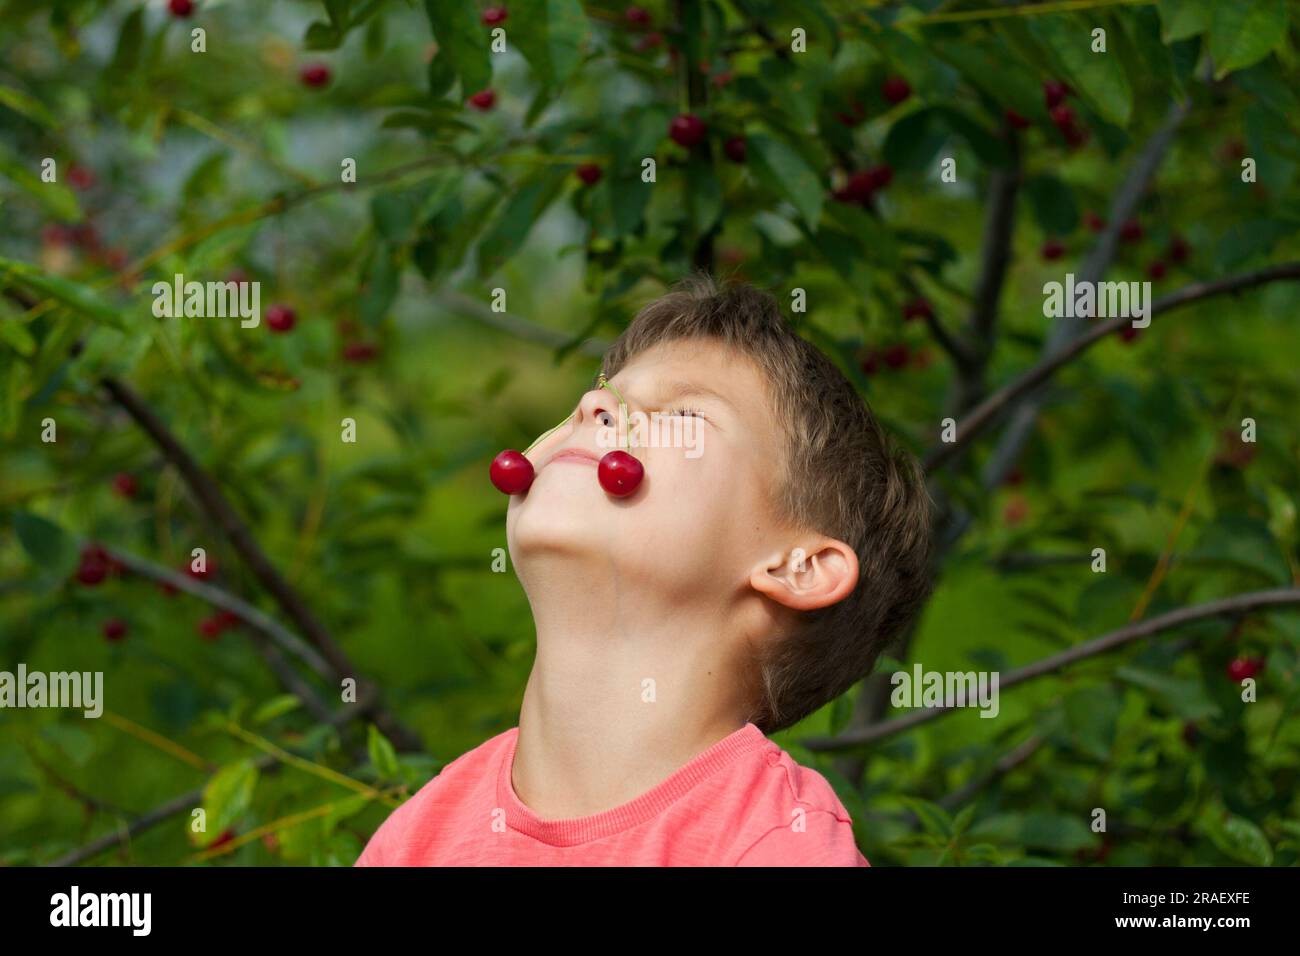 boy picking ripe red cherries from tree in garden. Portrait of happy child with cherries on nose background of cherry orchard. summer harvest season. Stock Photo